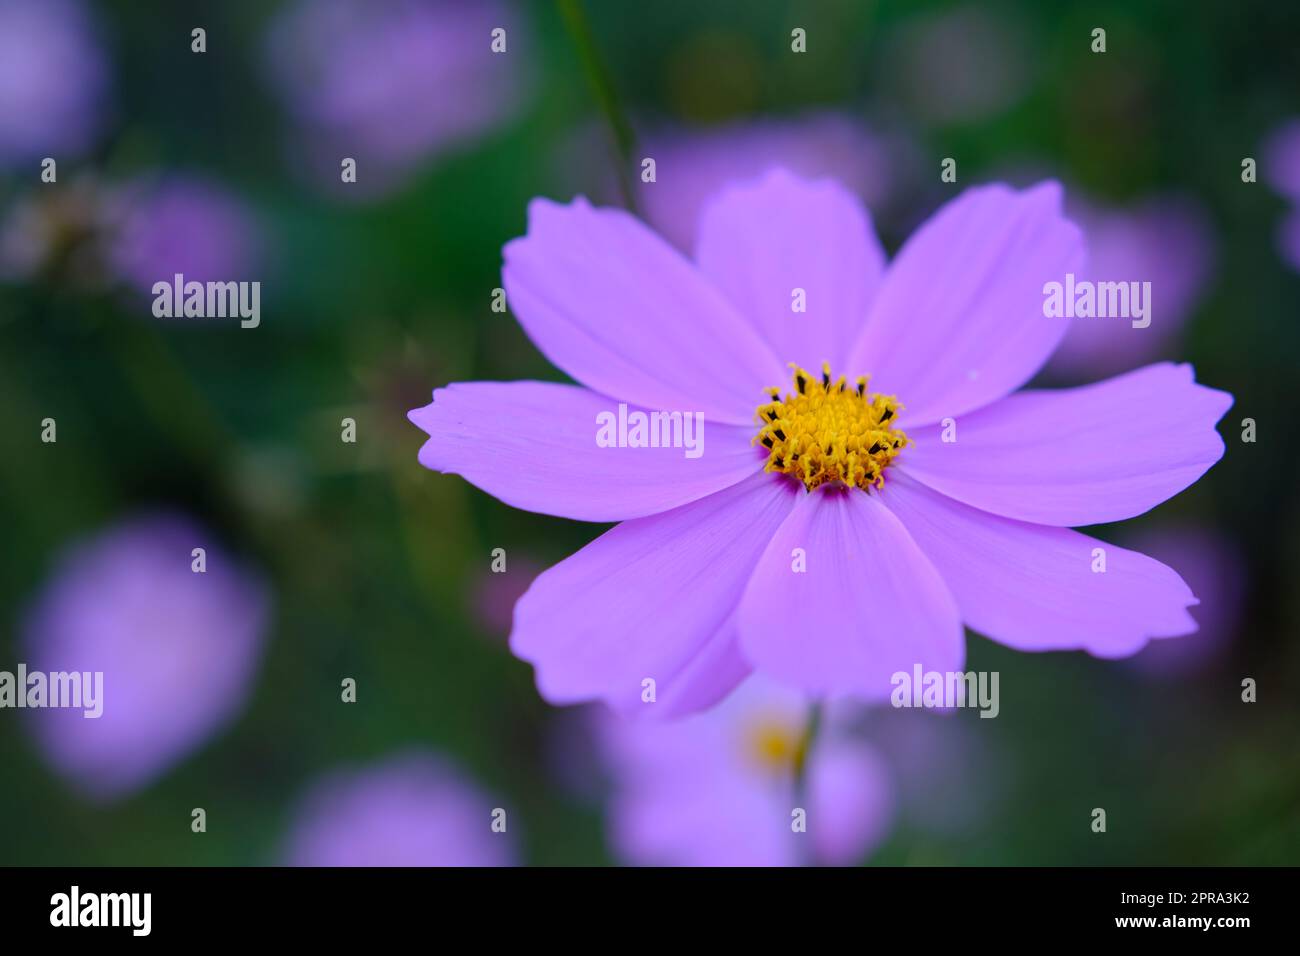 Bright pink cosmos aka aster flowers fin: kosmos kukka in a closeup image with some greens in the background. Beautiful spring flowers photographed in Stock Photo